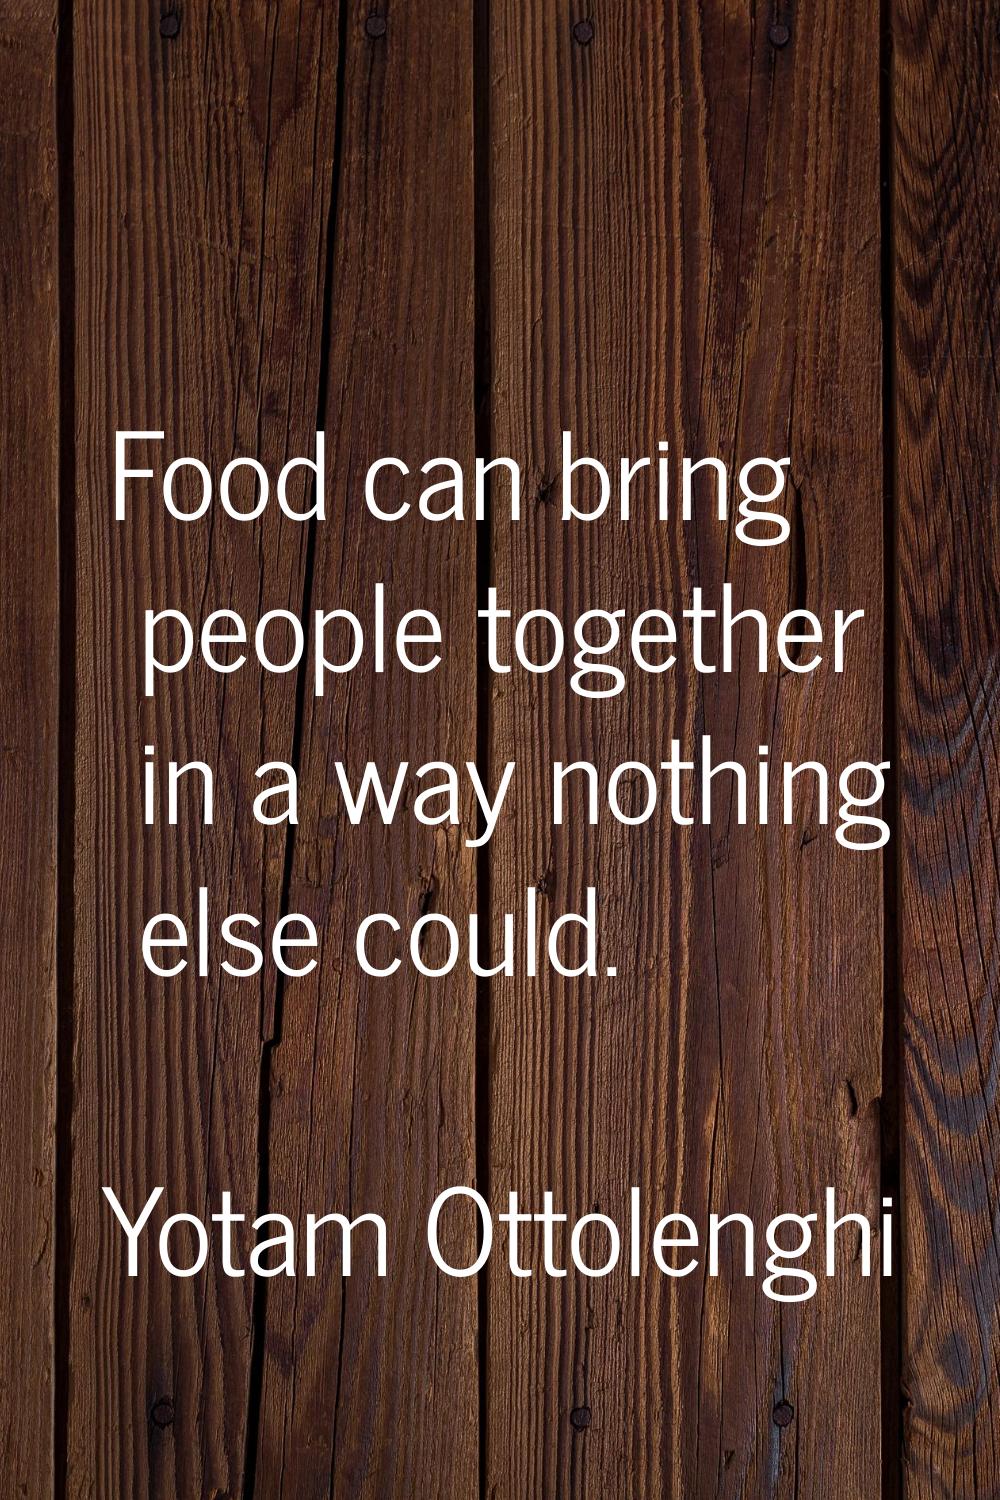 Food can bring people together in a way nothing else could.